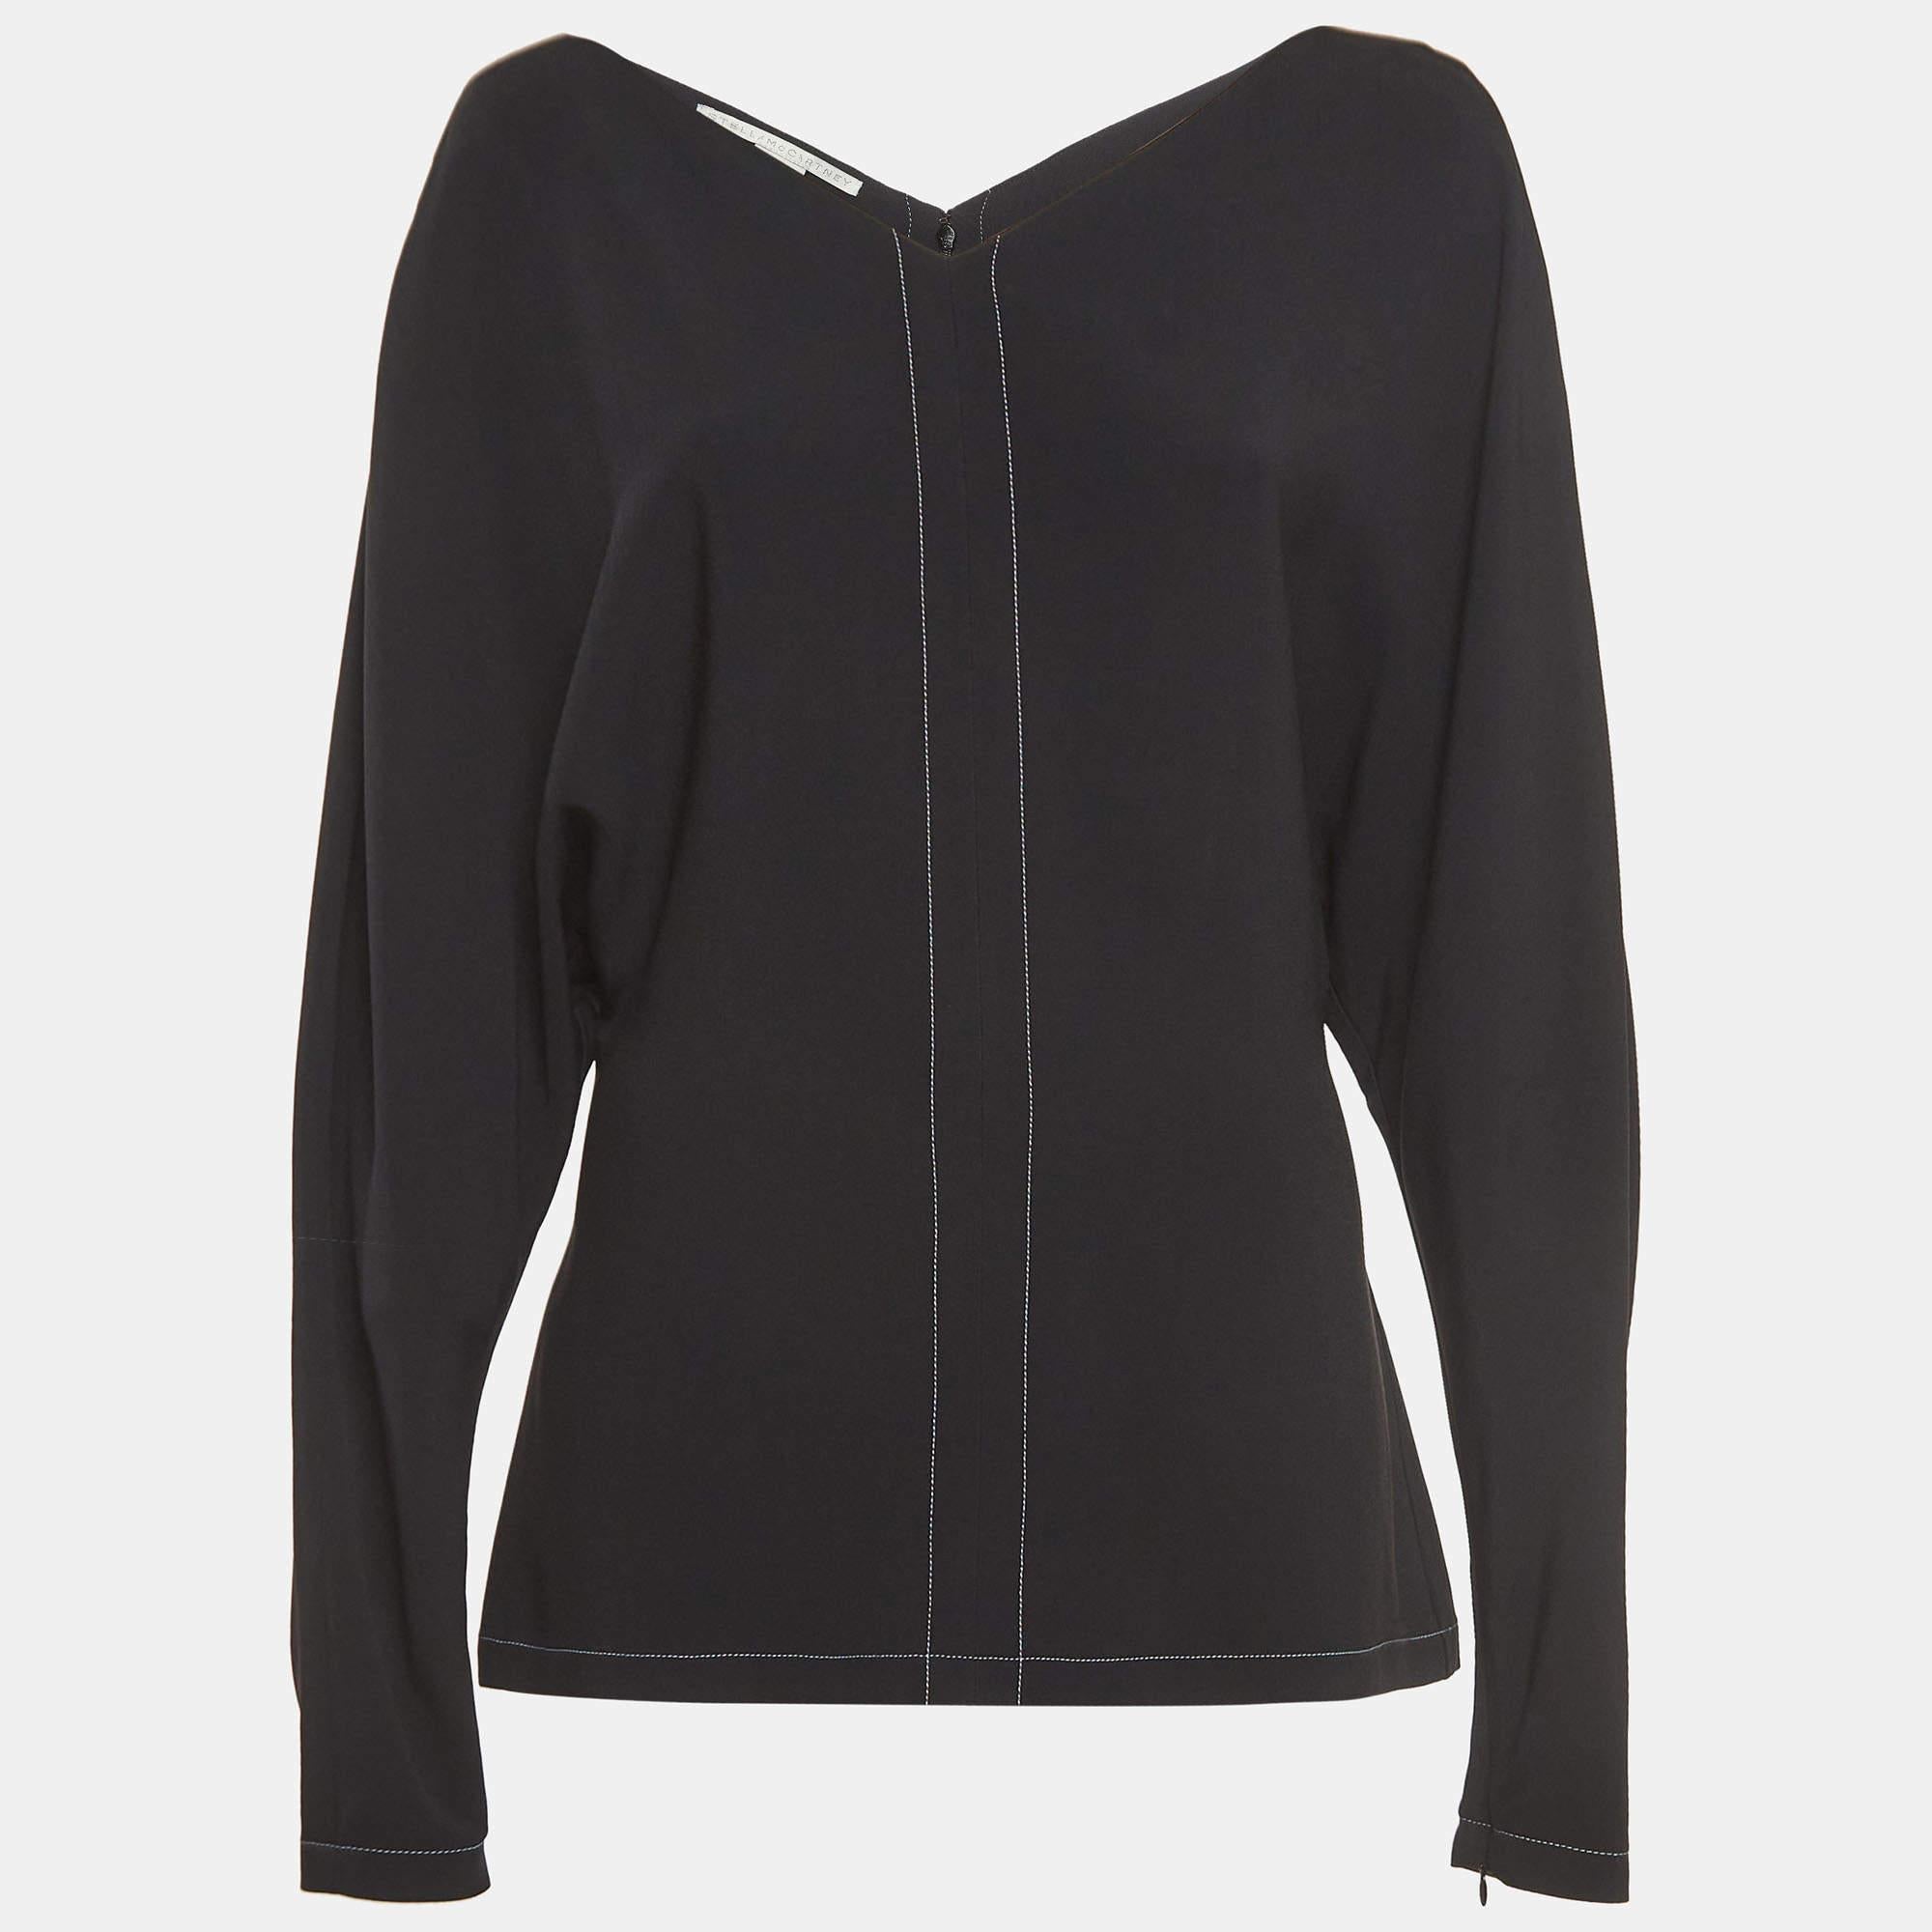 Find great style and comfort while wearing this Stella McCartney top. Tailored using the best fabrics, the creation has been given immense detail. Style it with a pair of jeans and flats.

